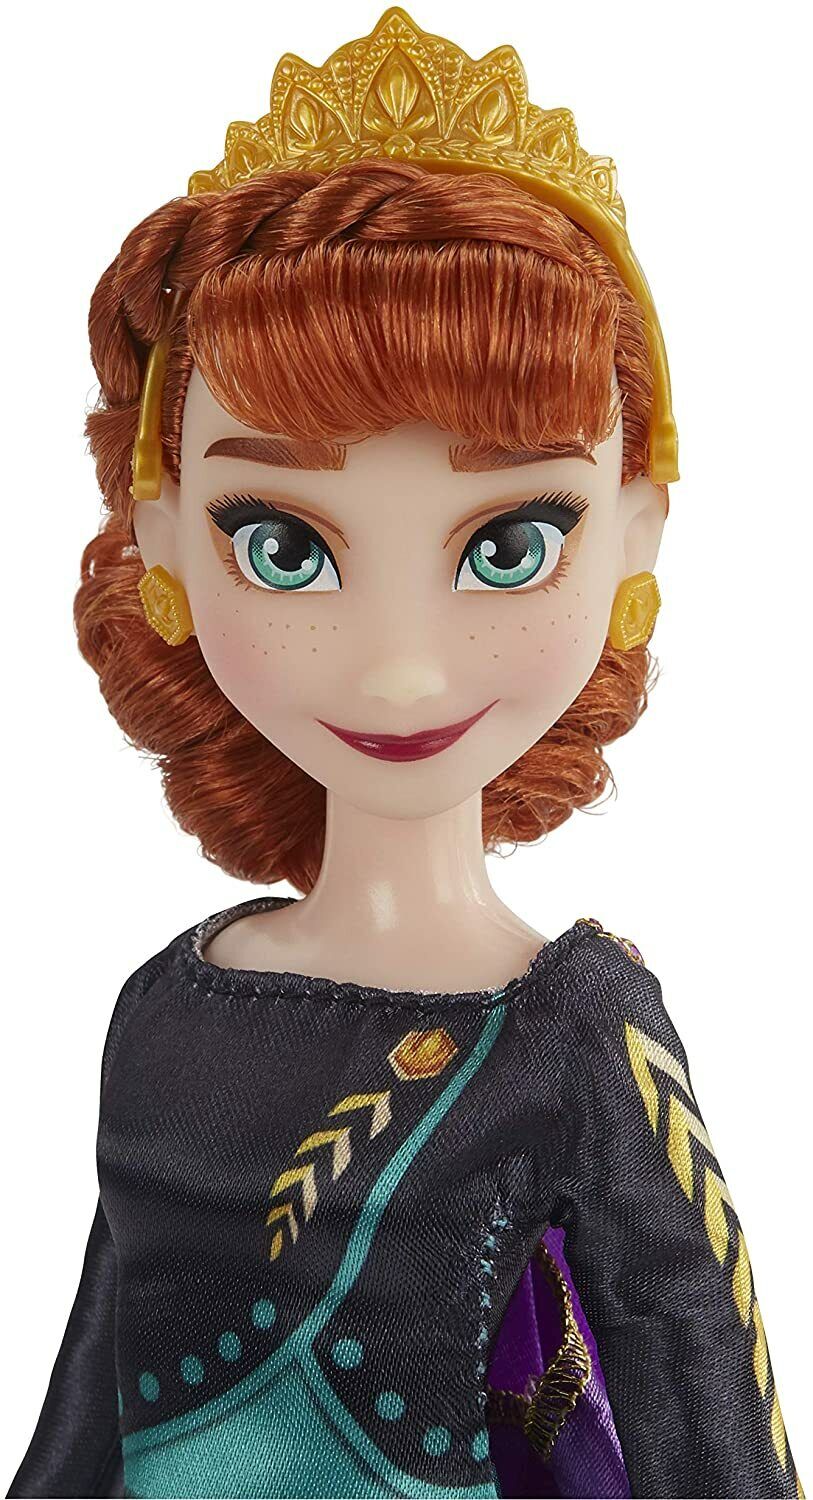 New Disney Frozen 2 Queen Anna Fashion Doll F1412 - Perfect Gift for Kids